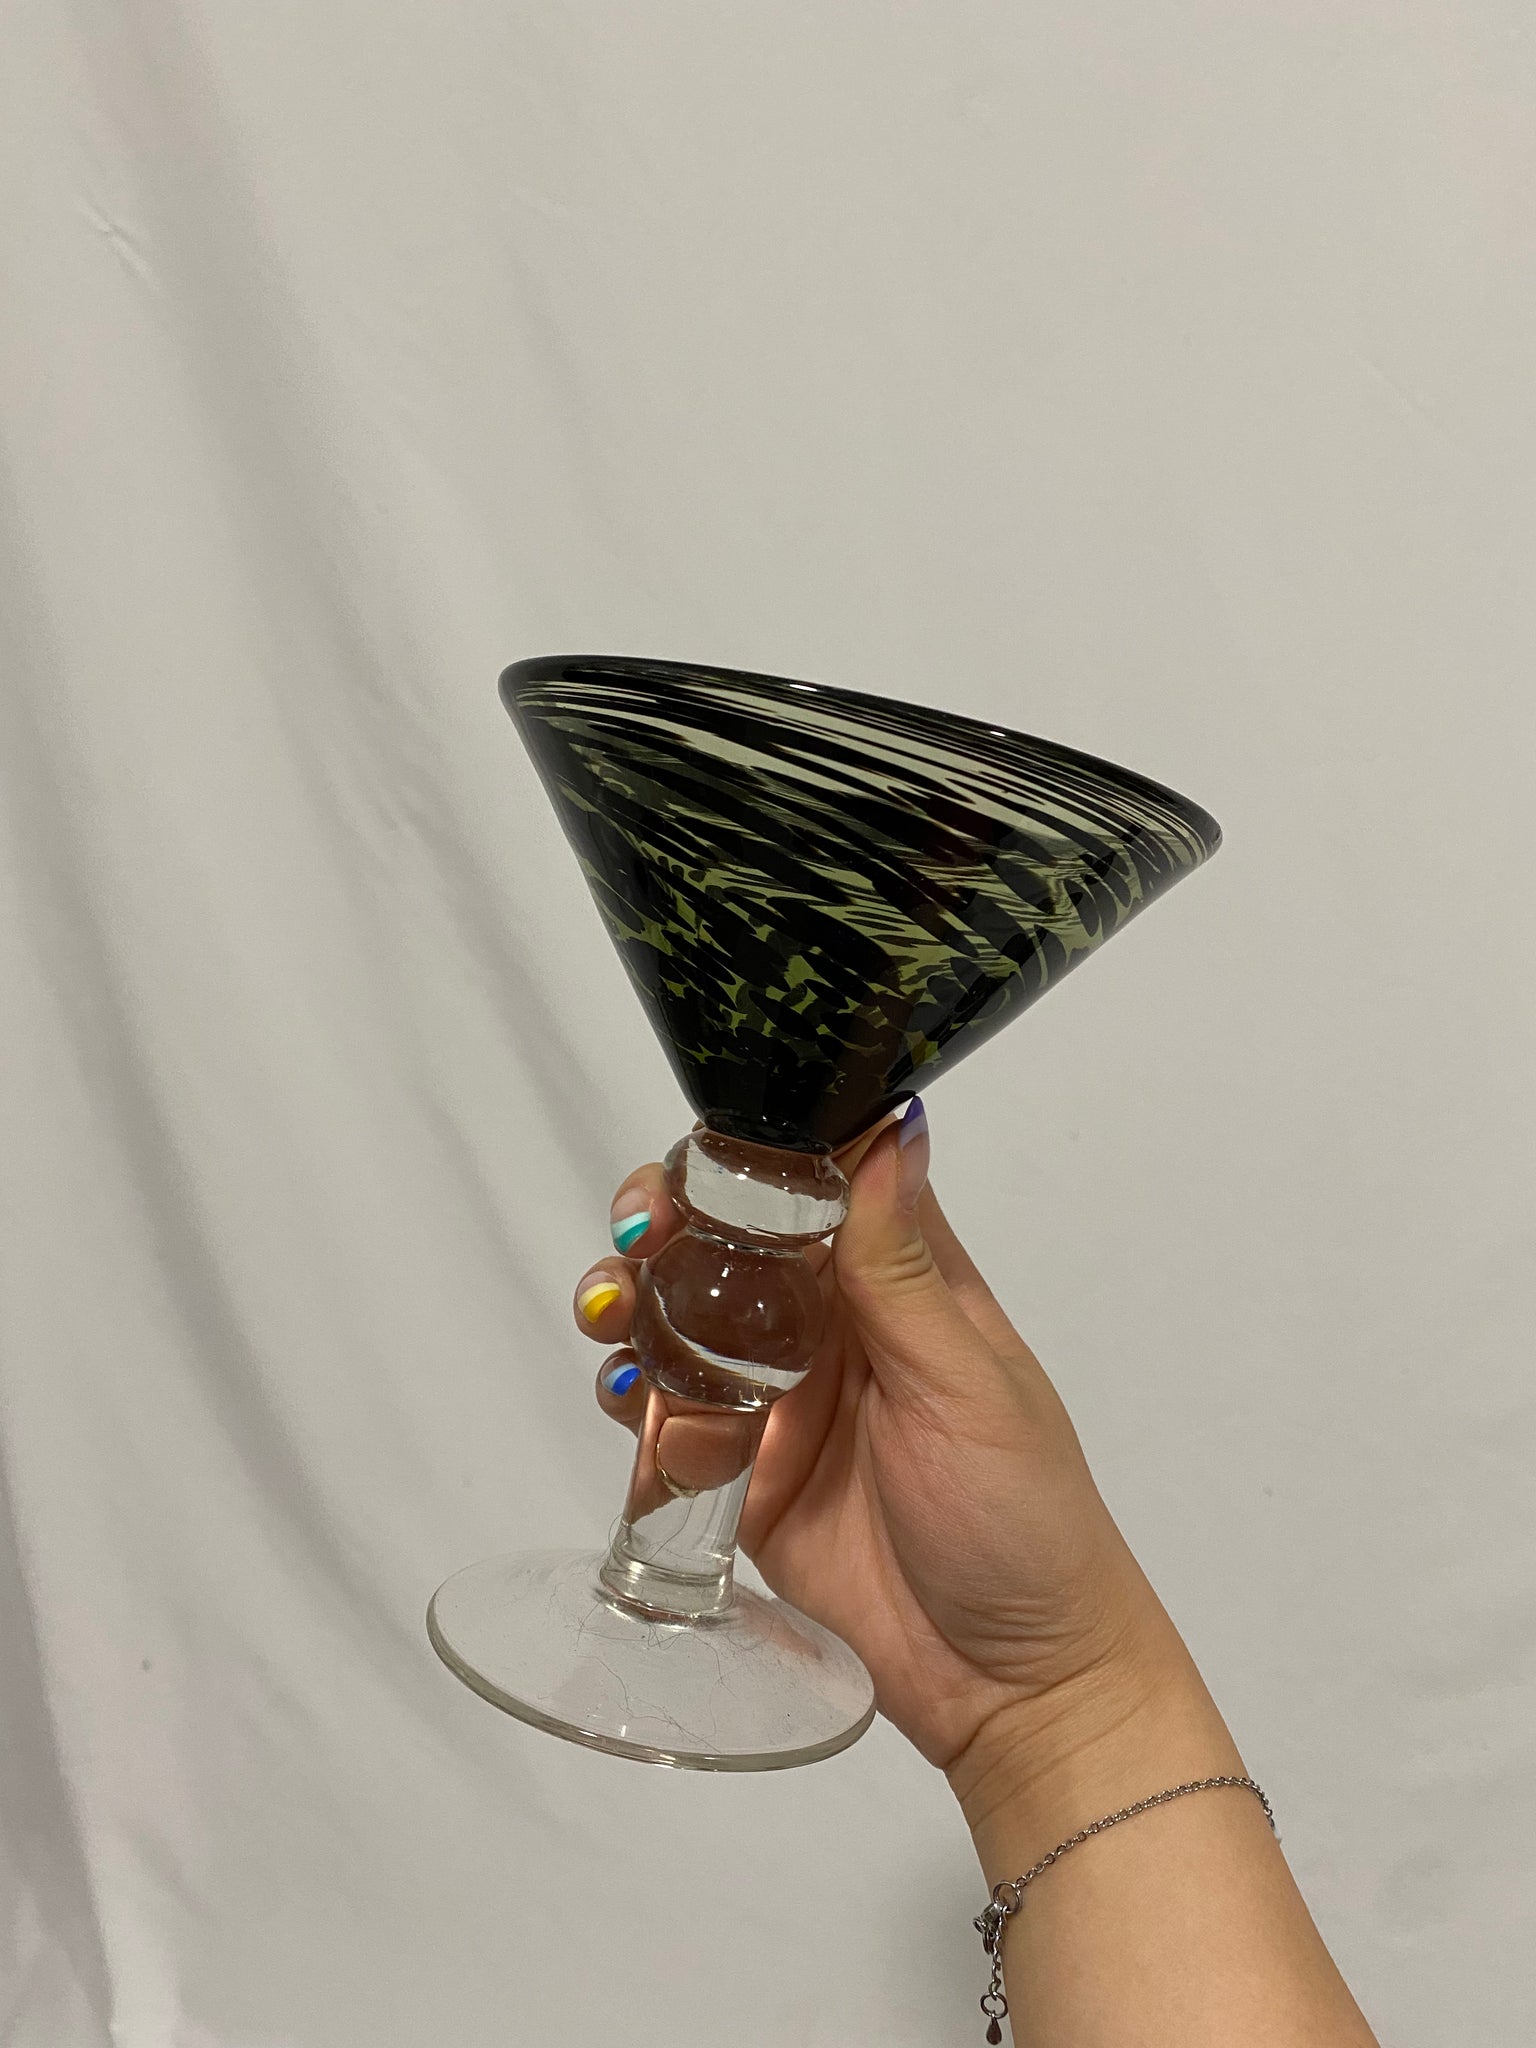 Handblown speckled glass pitcher and glasses